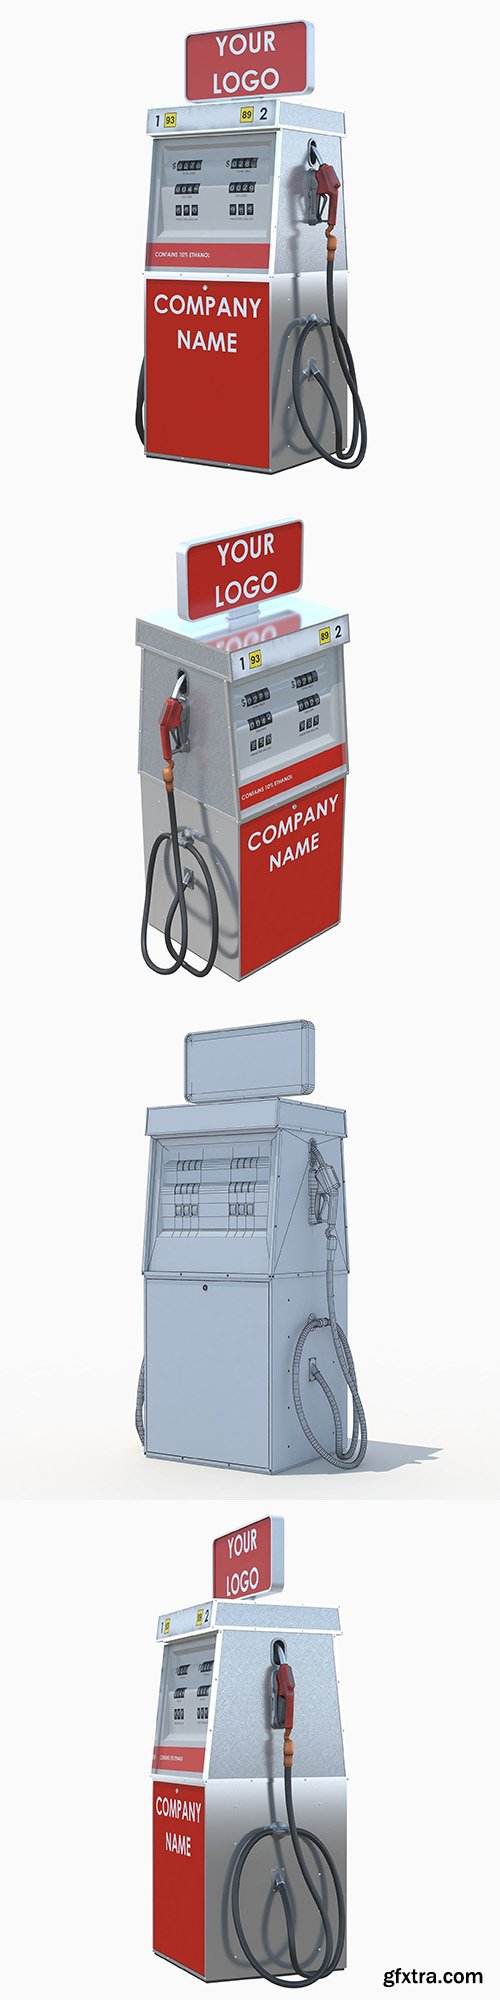 Cgtrader - Tunable fuel dispenser 3D model